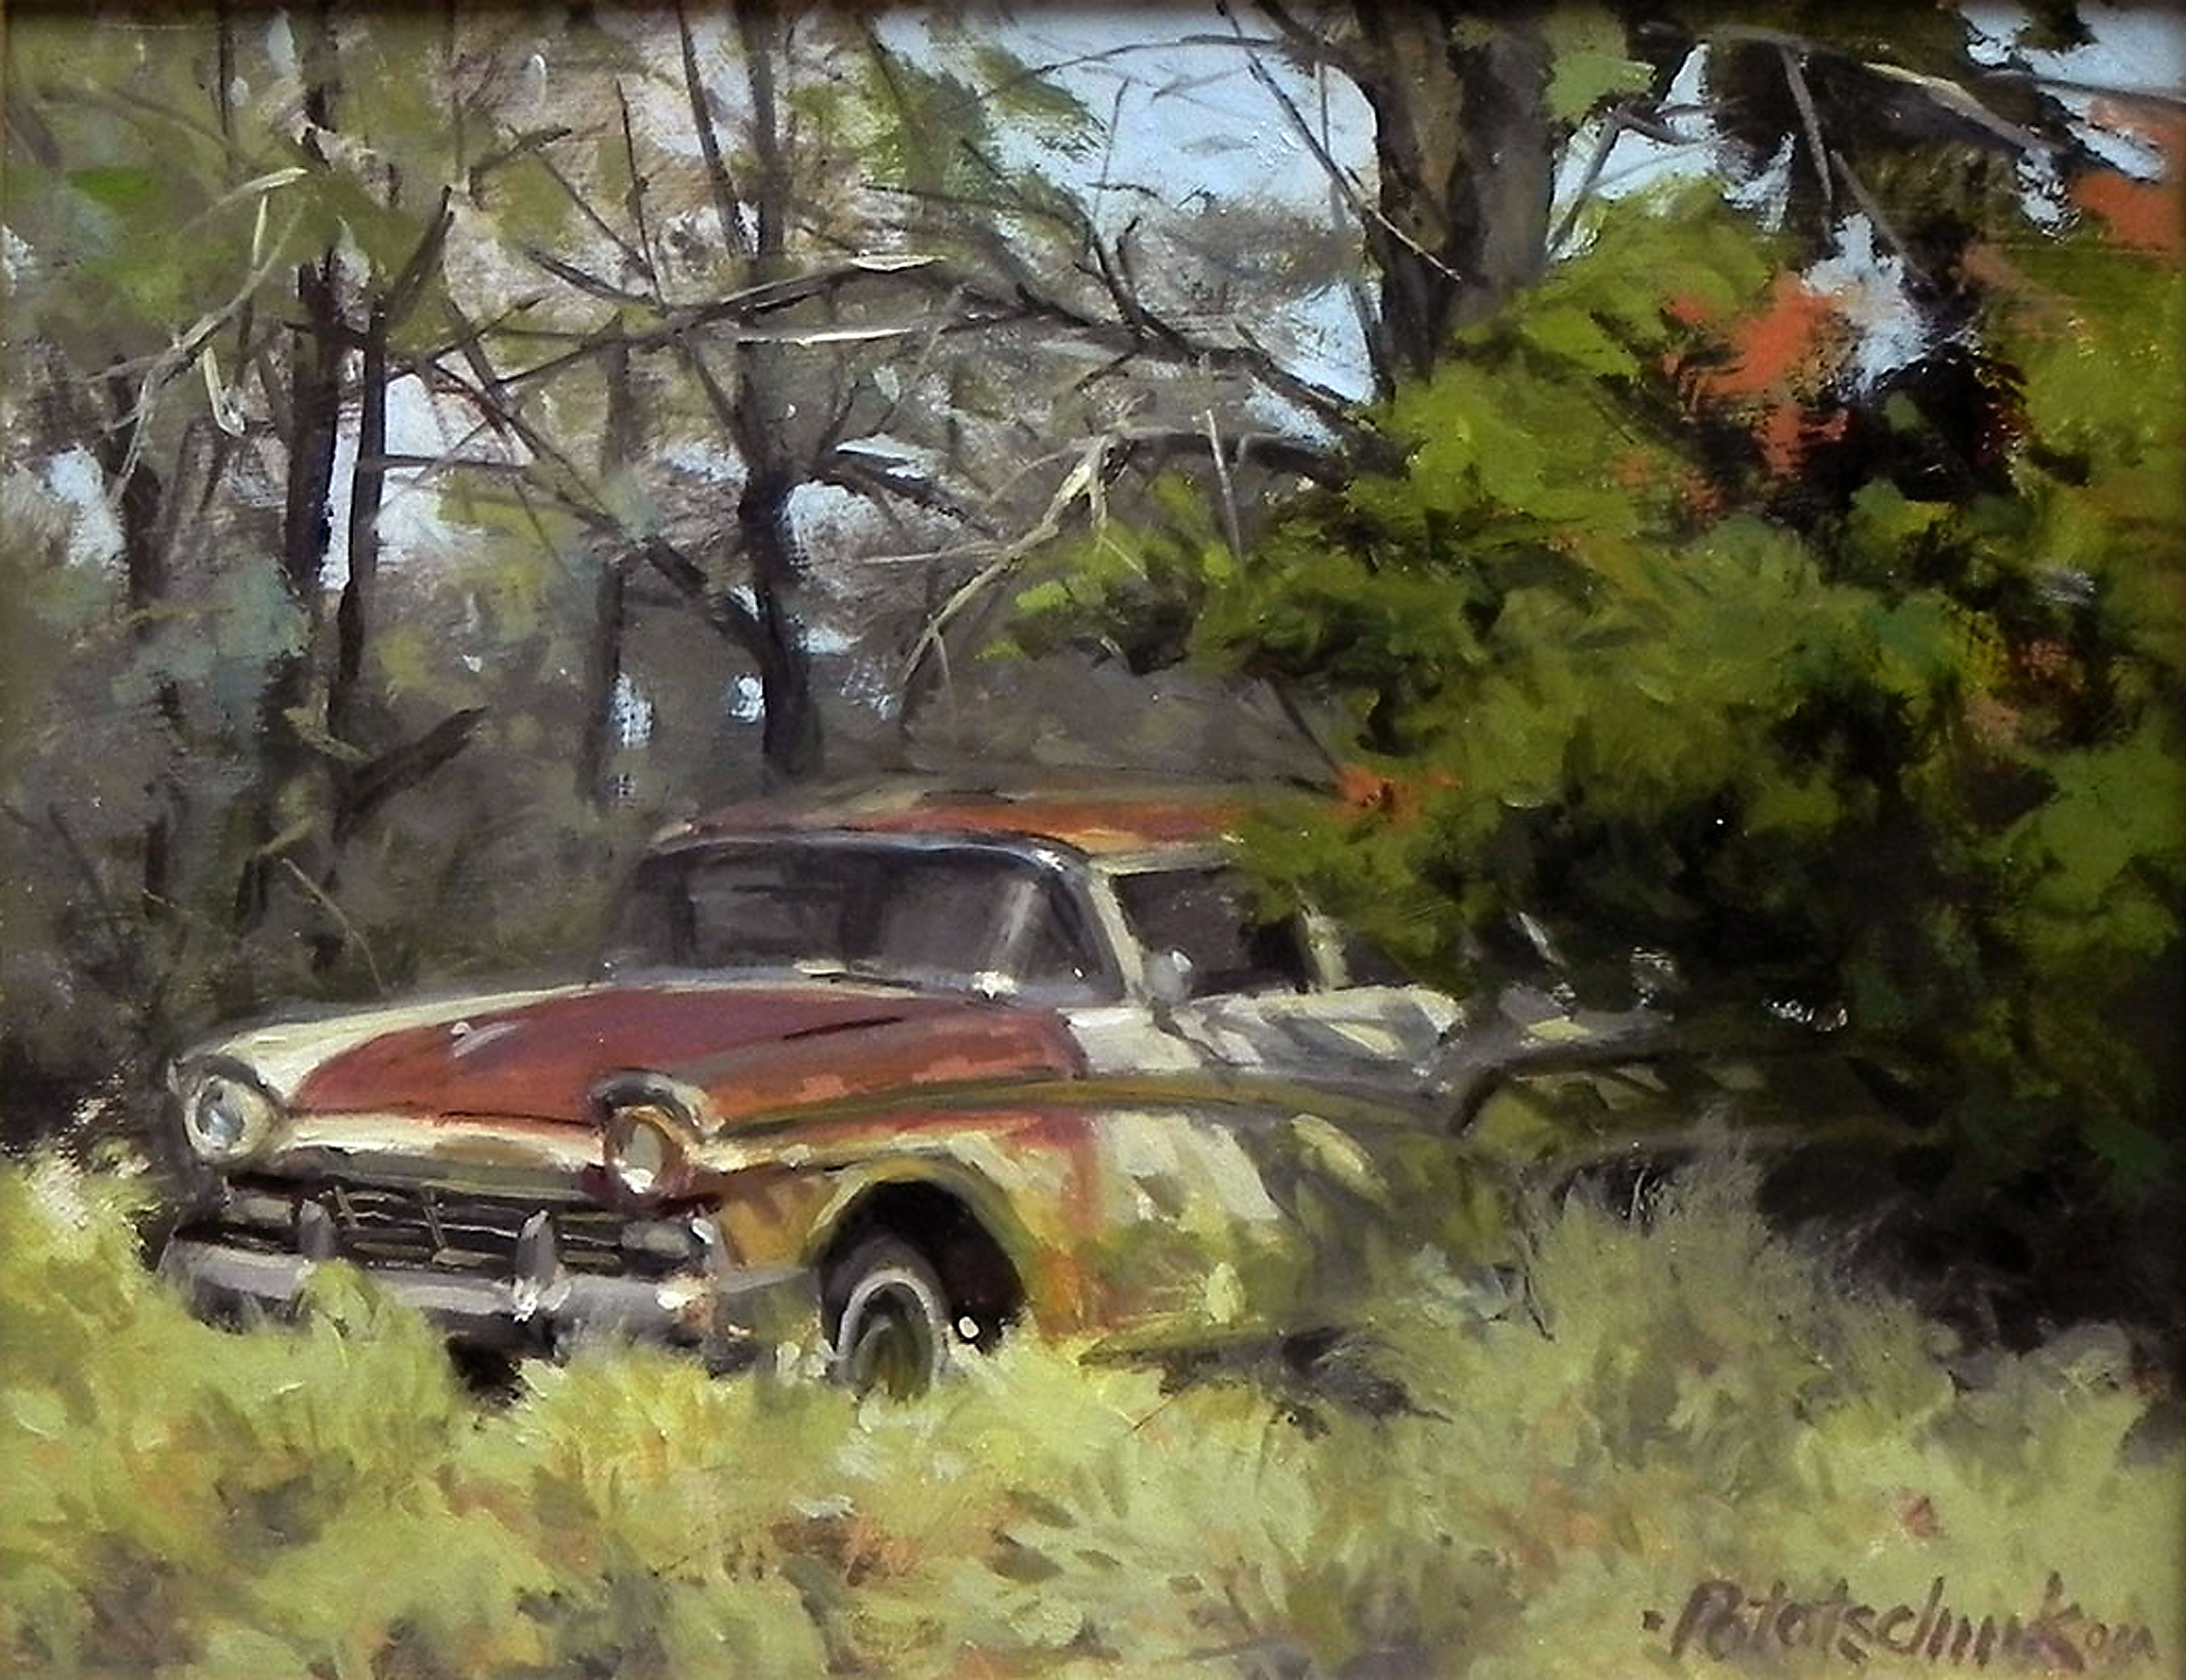 John Pototschnik*, “Remnants of ’57,” 2012, oil, 8 x 10 in., Private collection, Plein air